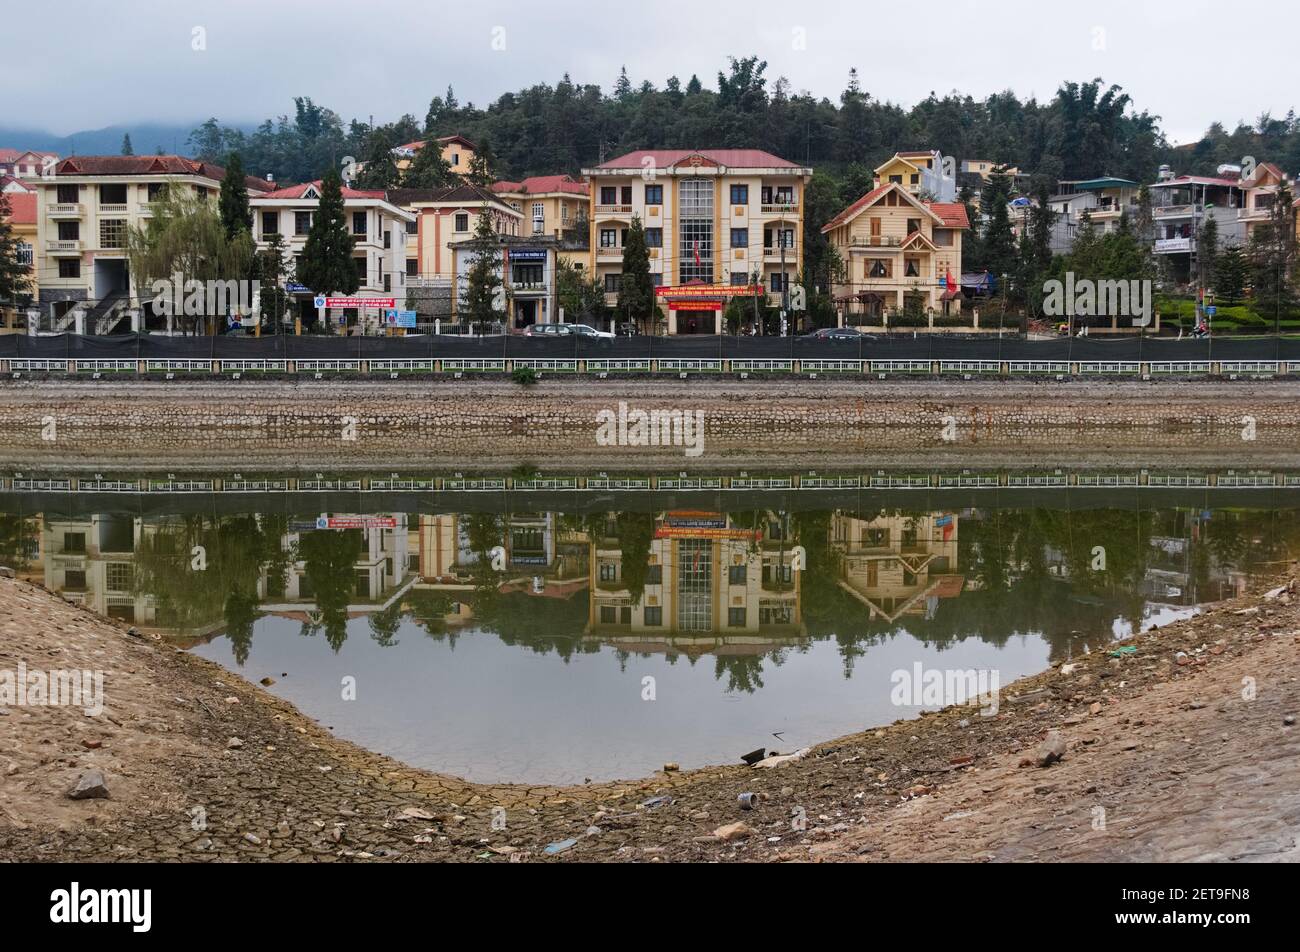 October, 2015 - Sa Pa, Vietnam: Residential buildings reflected in water of city lake. Dirty water with garbage. Low water level. Stock Photo